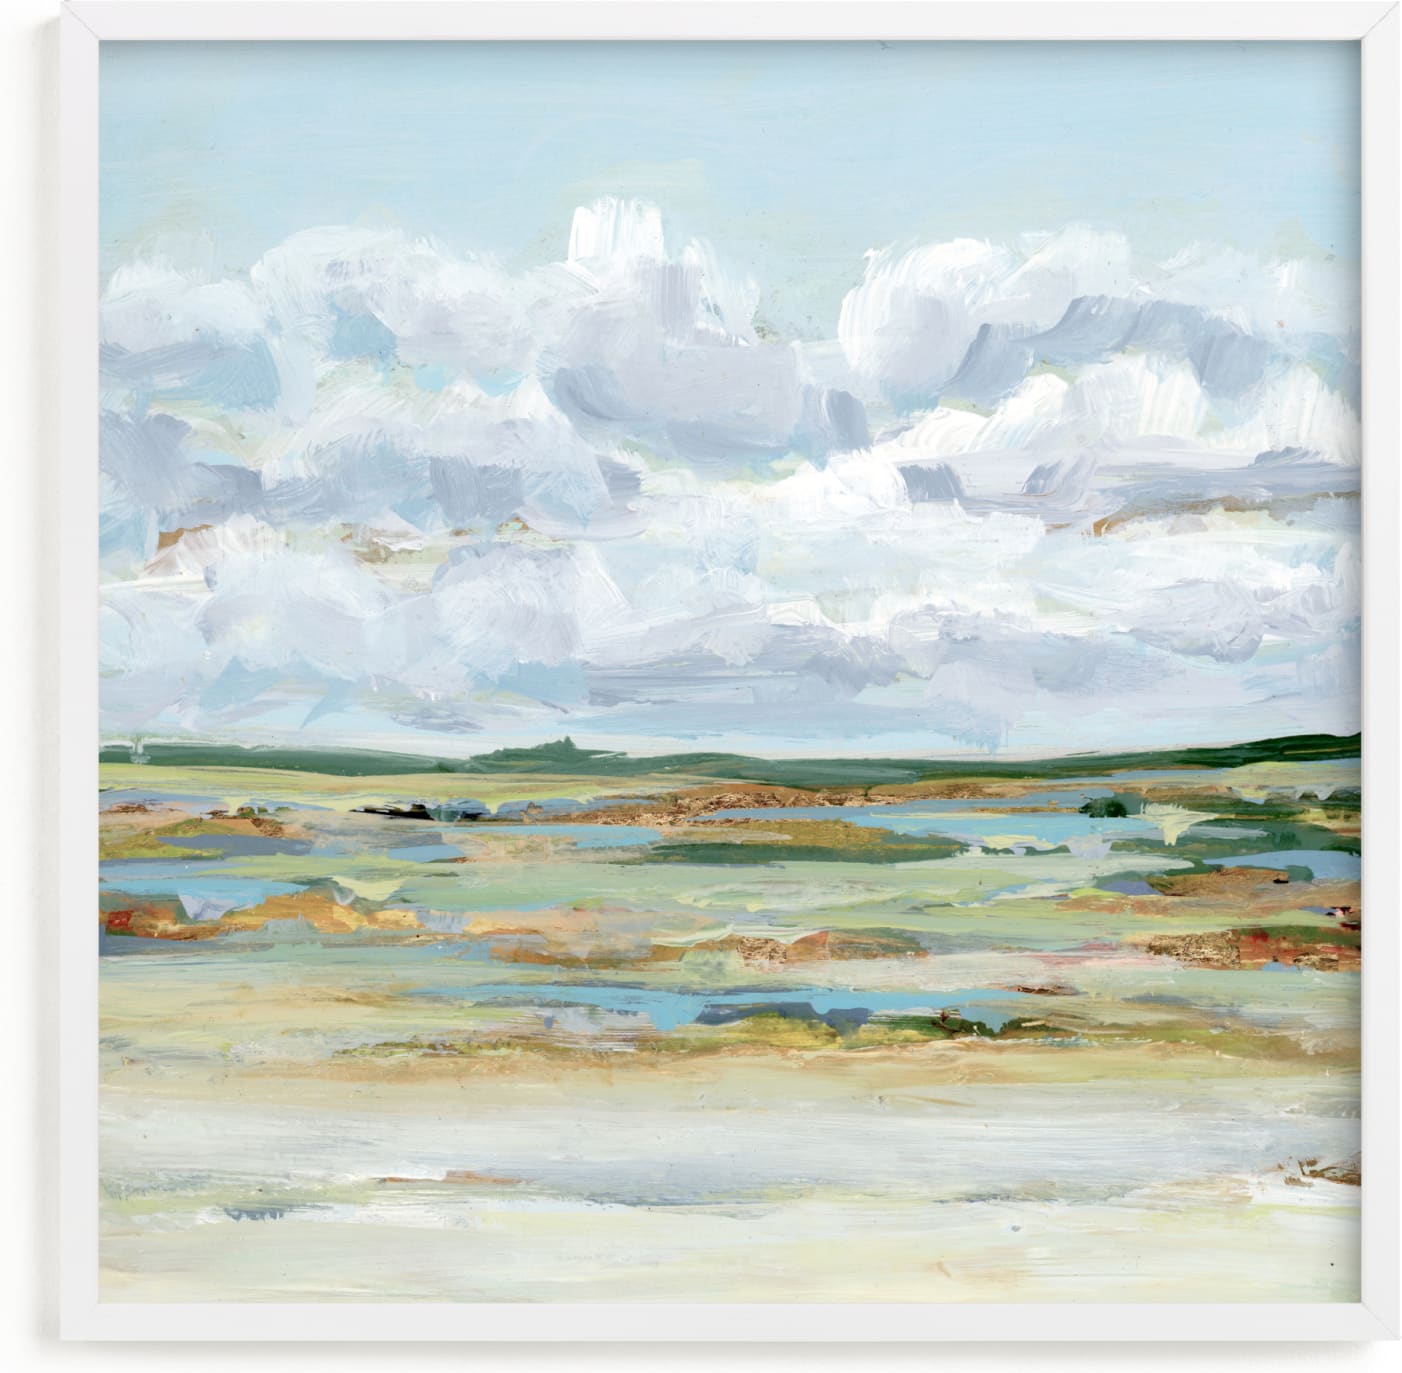 This is a white art by Nicole Walsh called Of the Prairies.